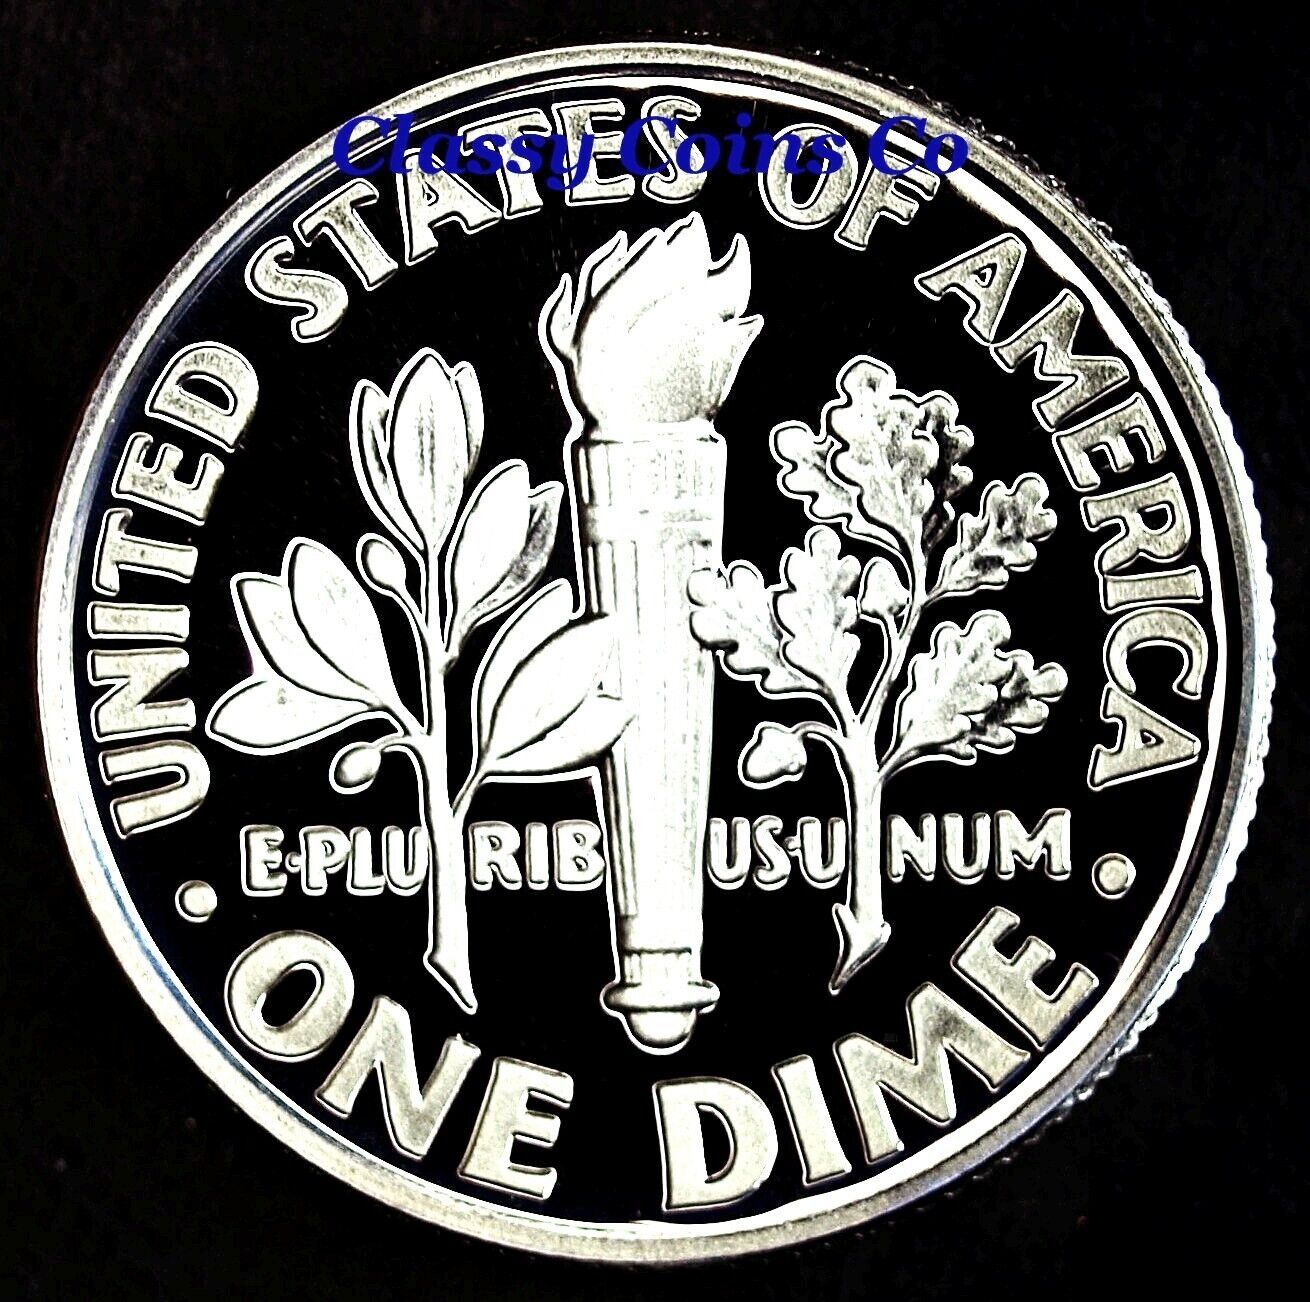 2002 S Clad Proof Roosevelt Dime ☆☆ Ultra Cameos ☆☆ Fresh Out of Proof Set